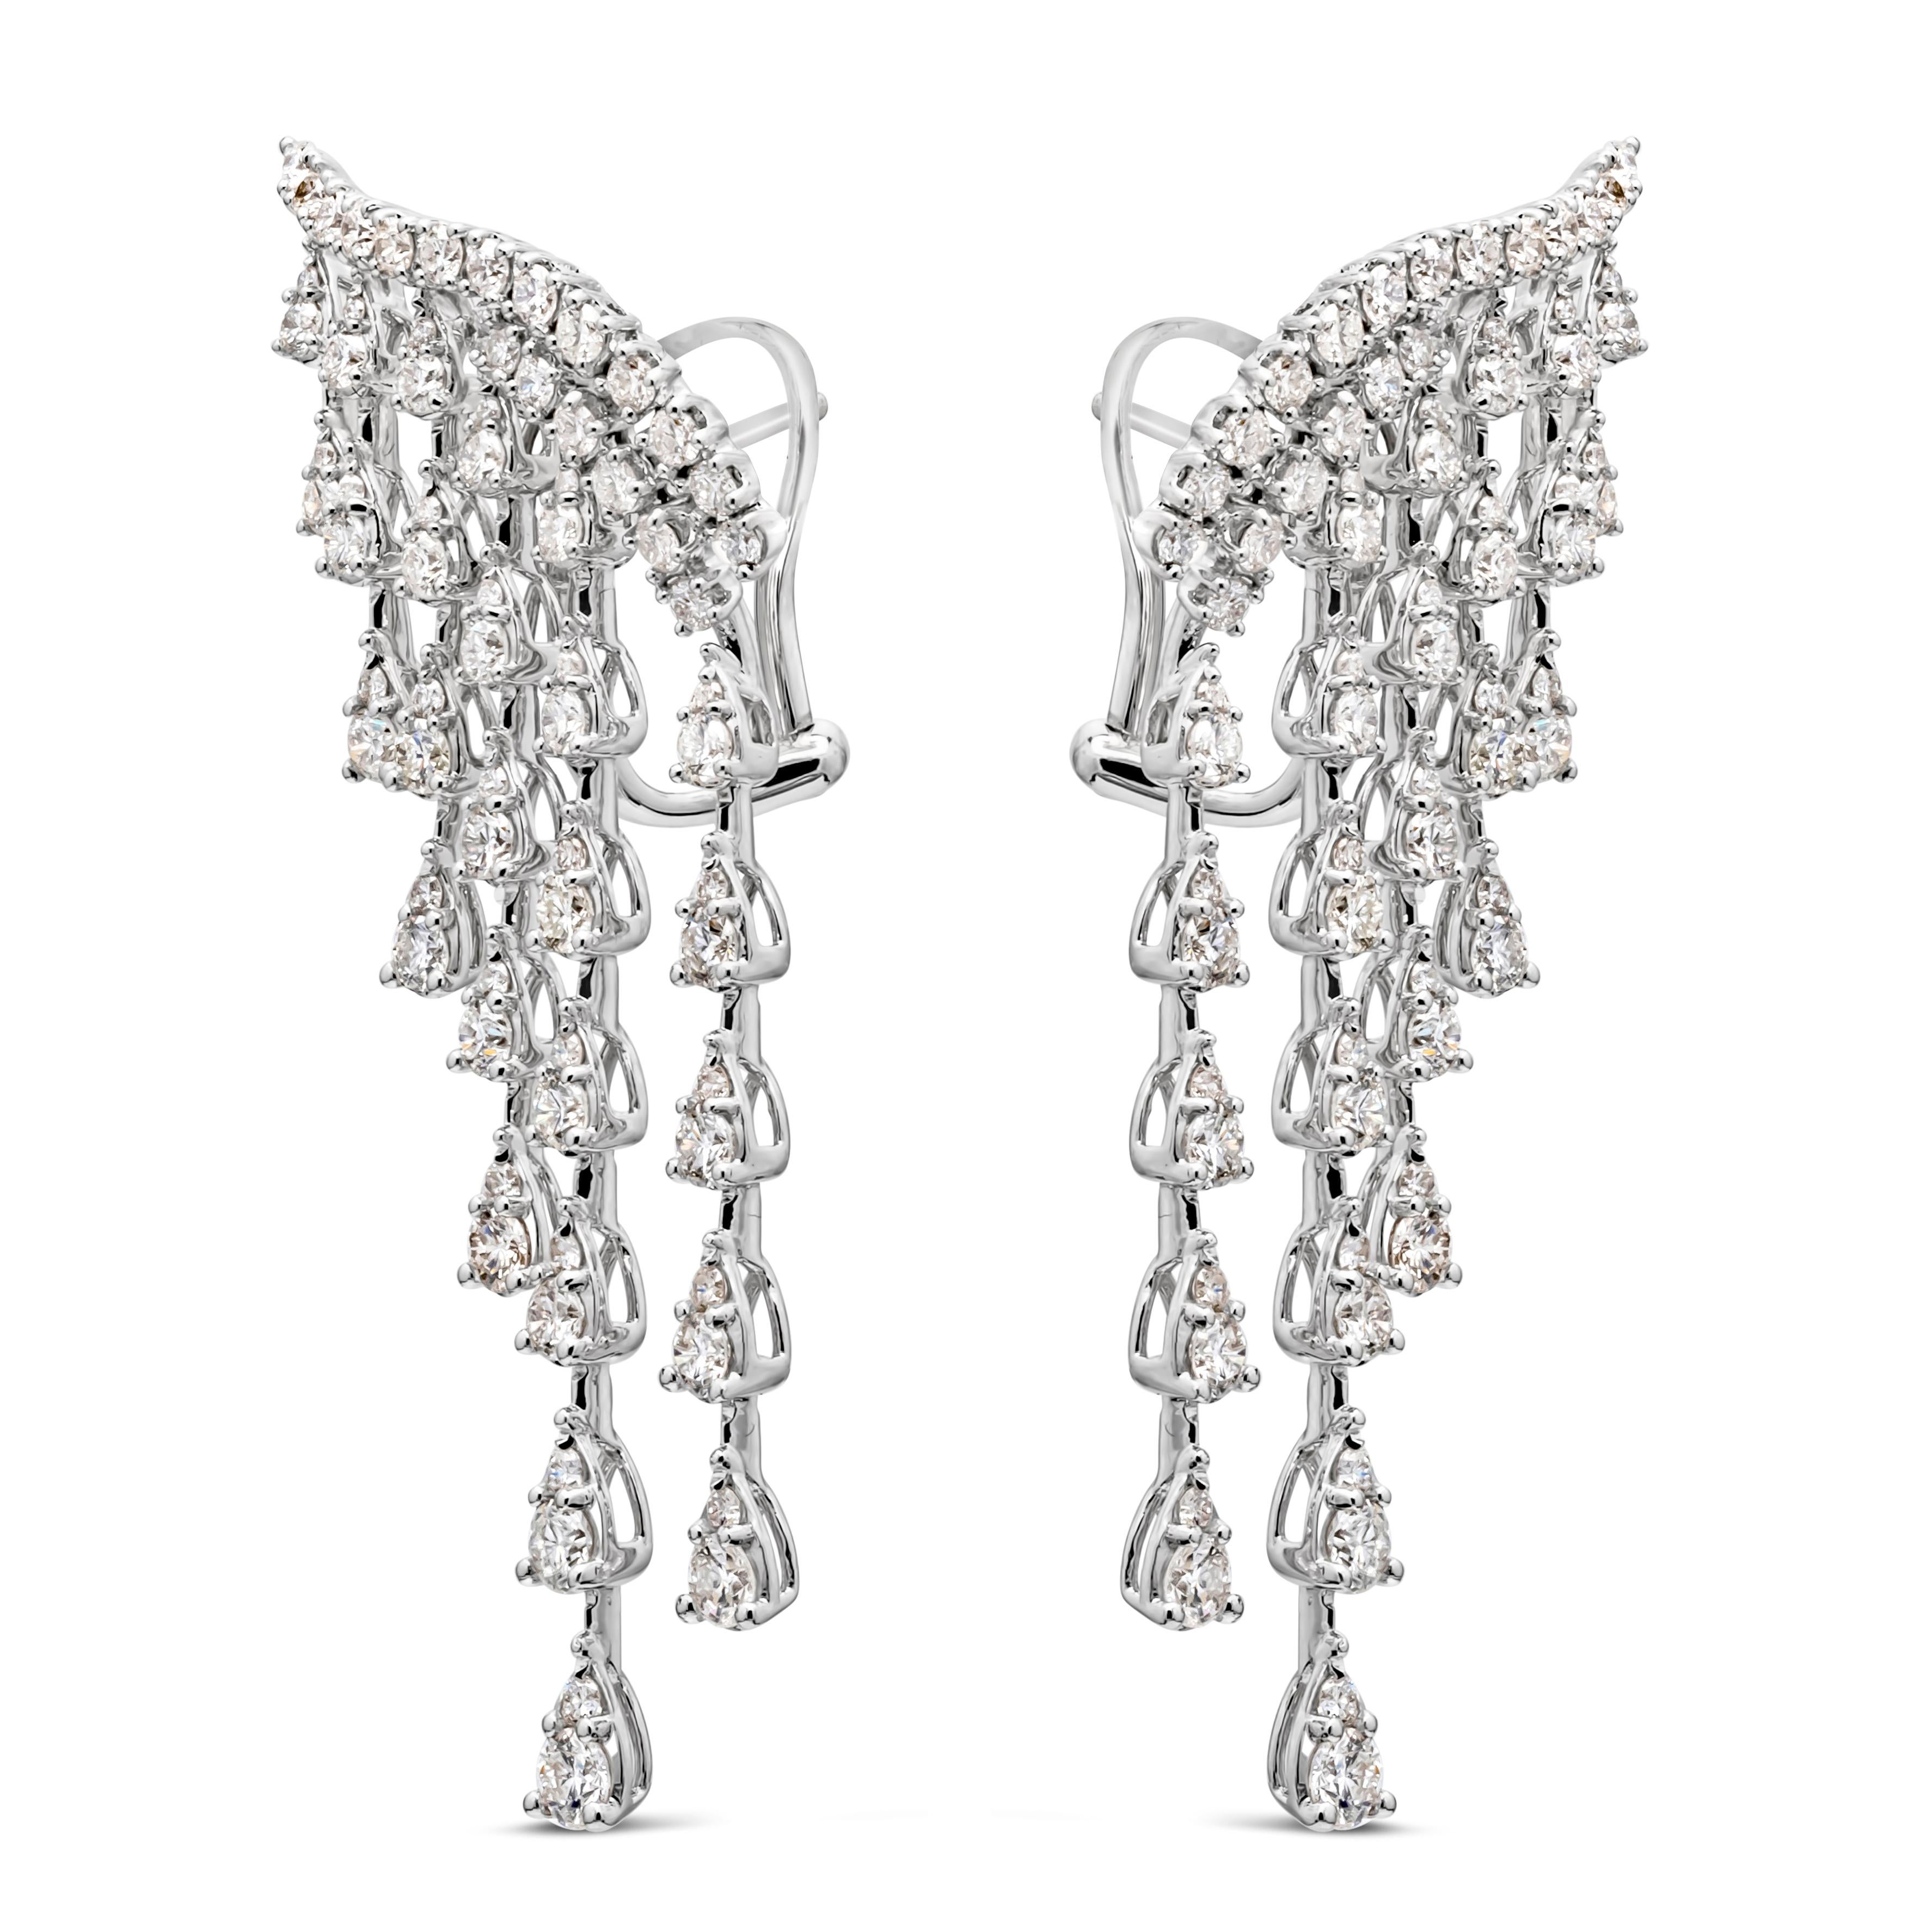 Contemporary Roman Malakov 3.41 Carats Total Round Diamond Crawlers Chandelier Earrings For Sale